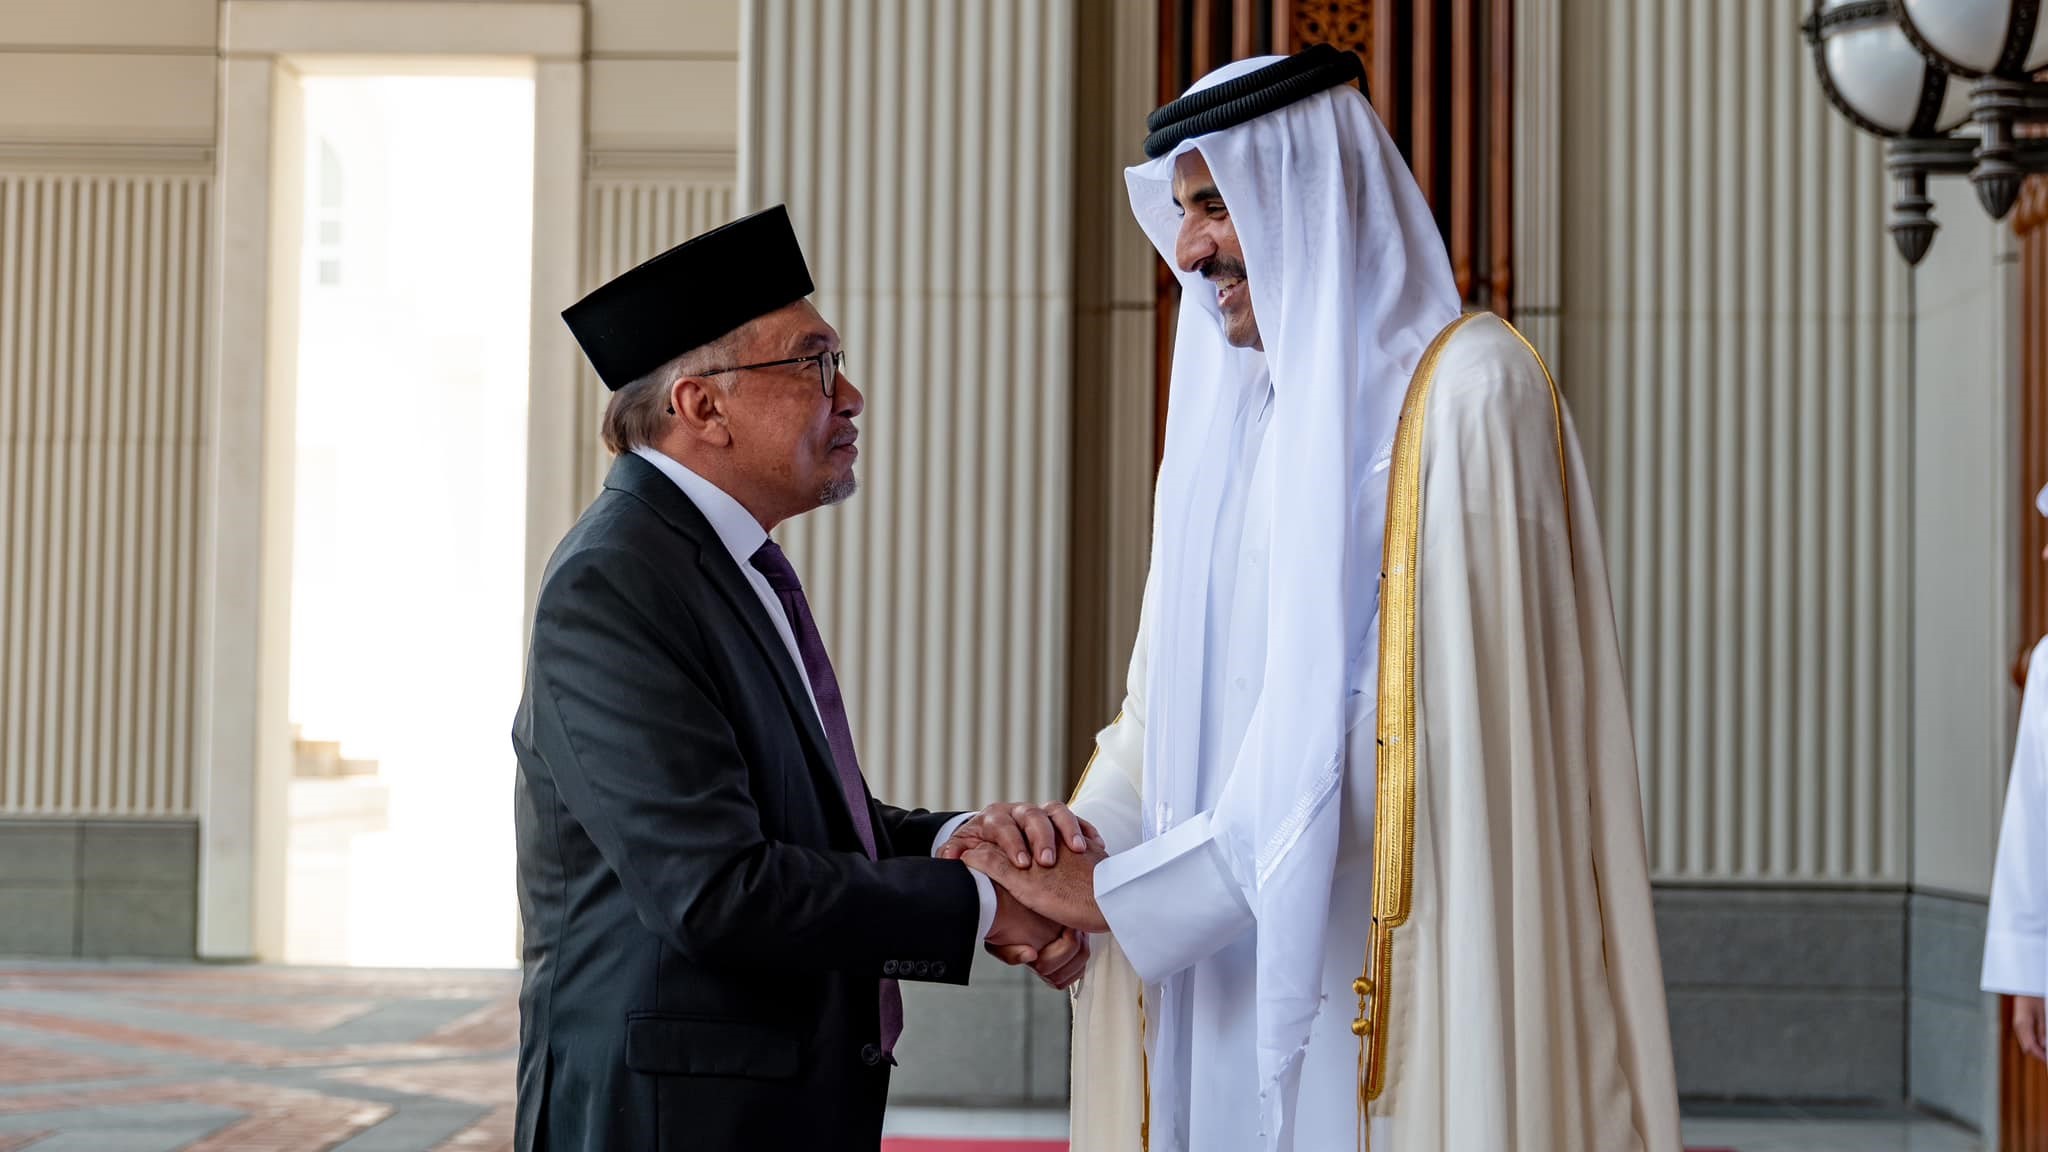 Malaysia-Qatar investment cooperation to be boosted in coming years: Anwar